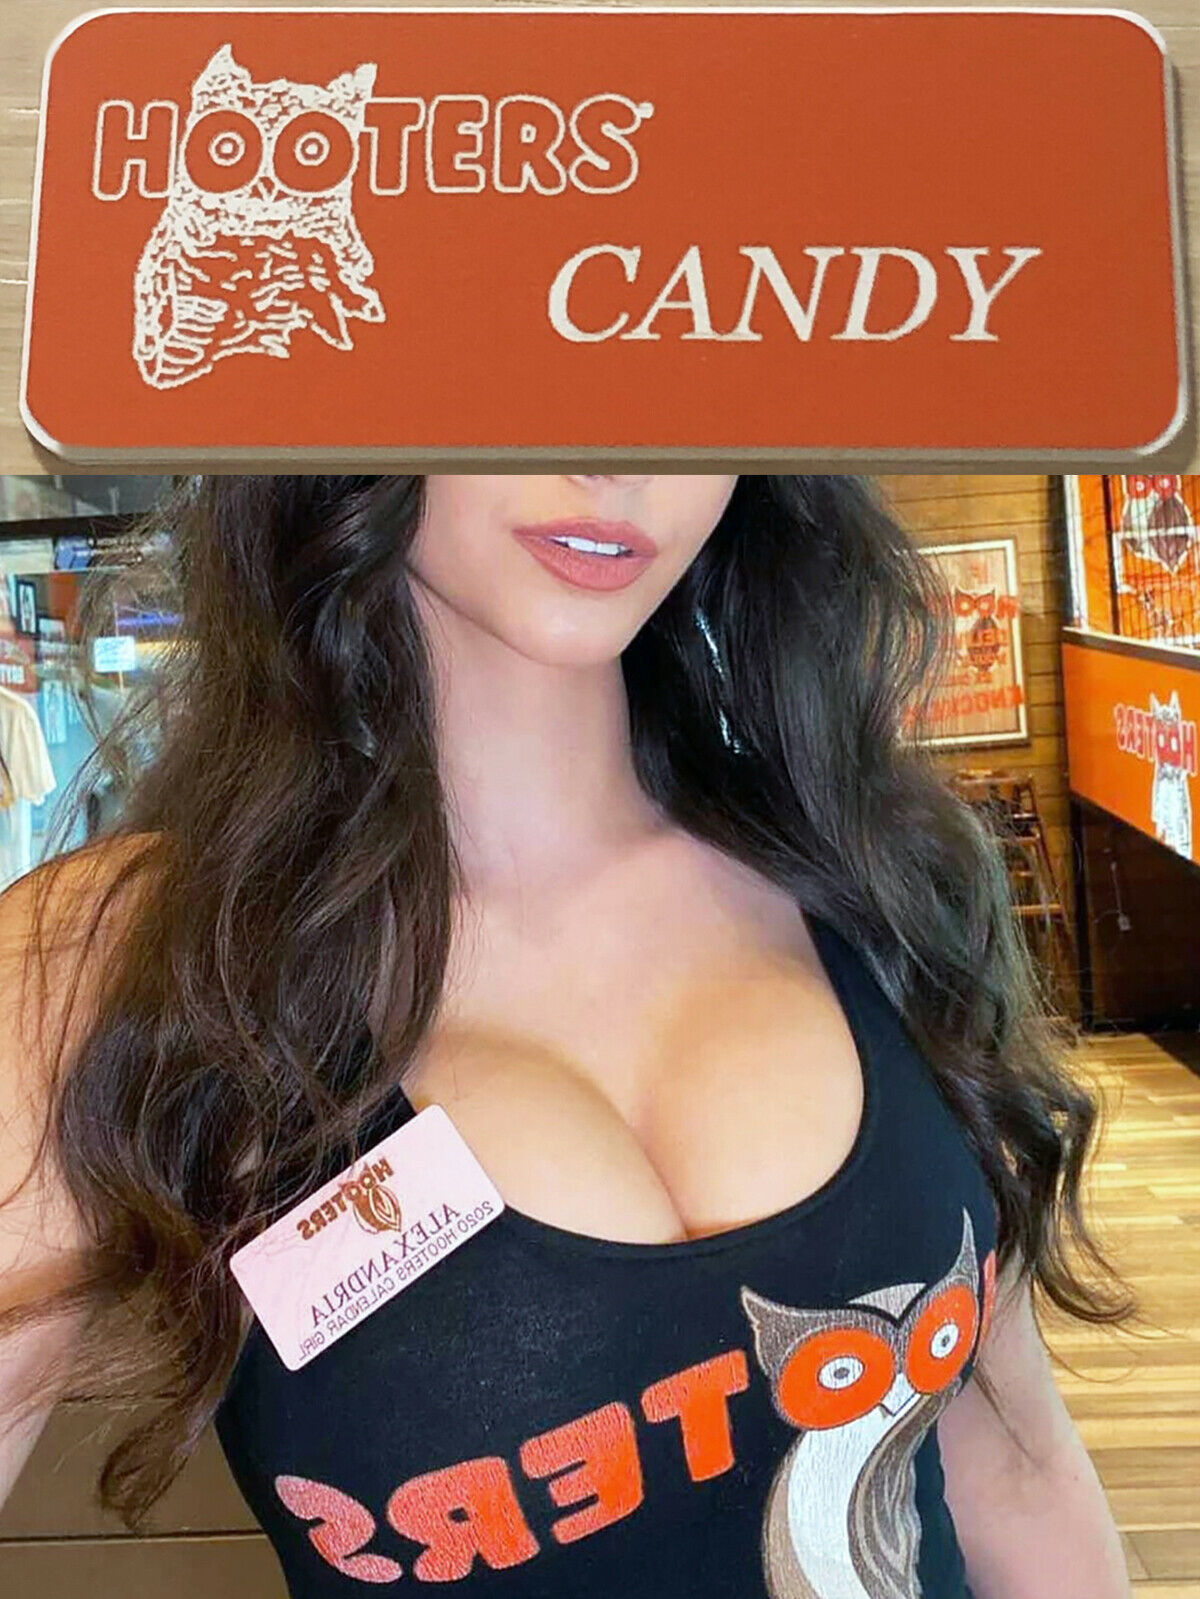 ~new~ Candy Name Tag Hooters Uniform Halloween Costume Collectible Pin Badge